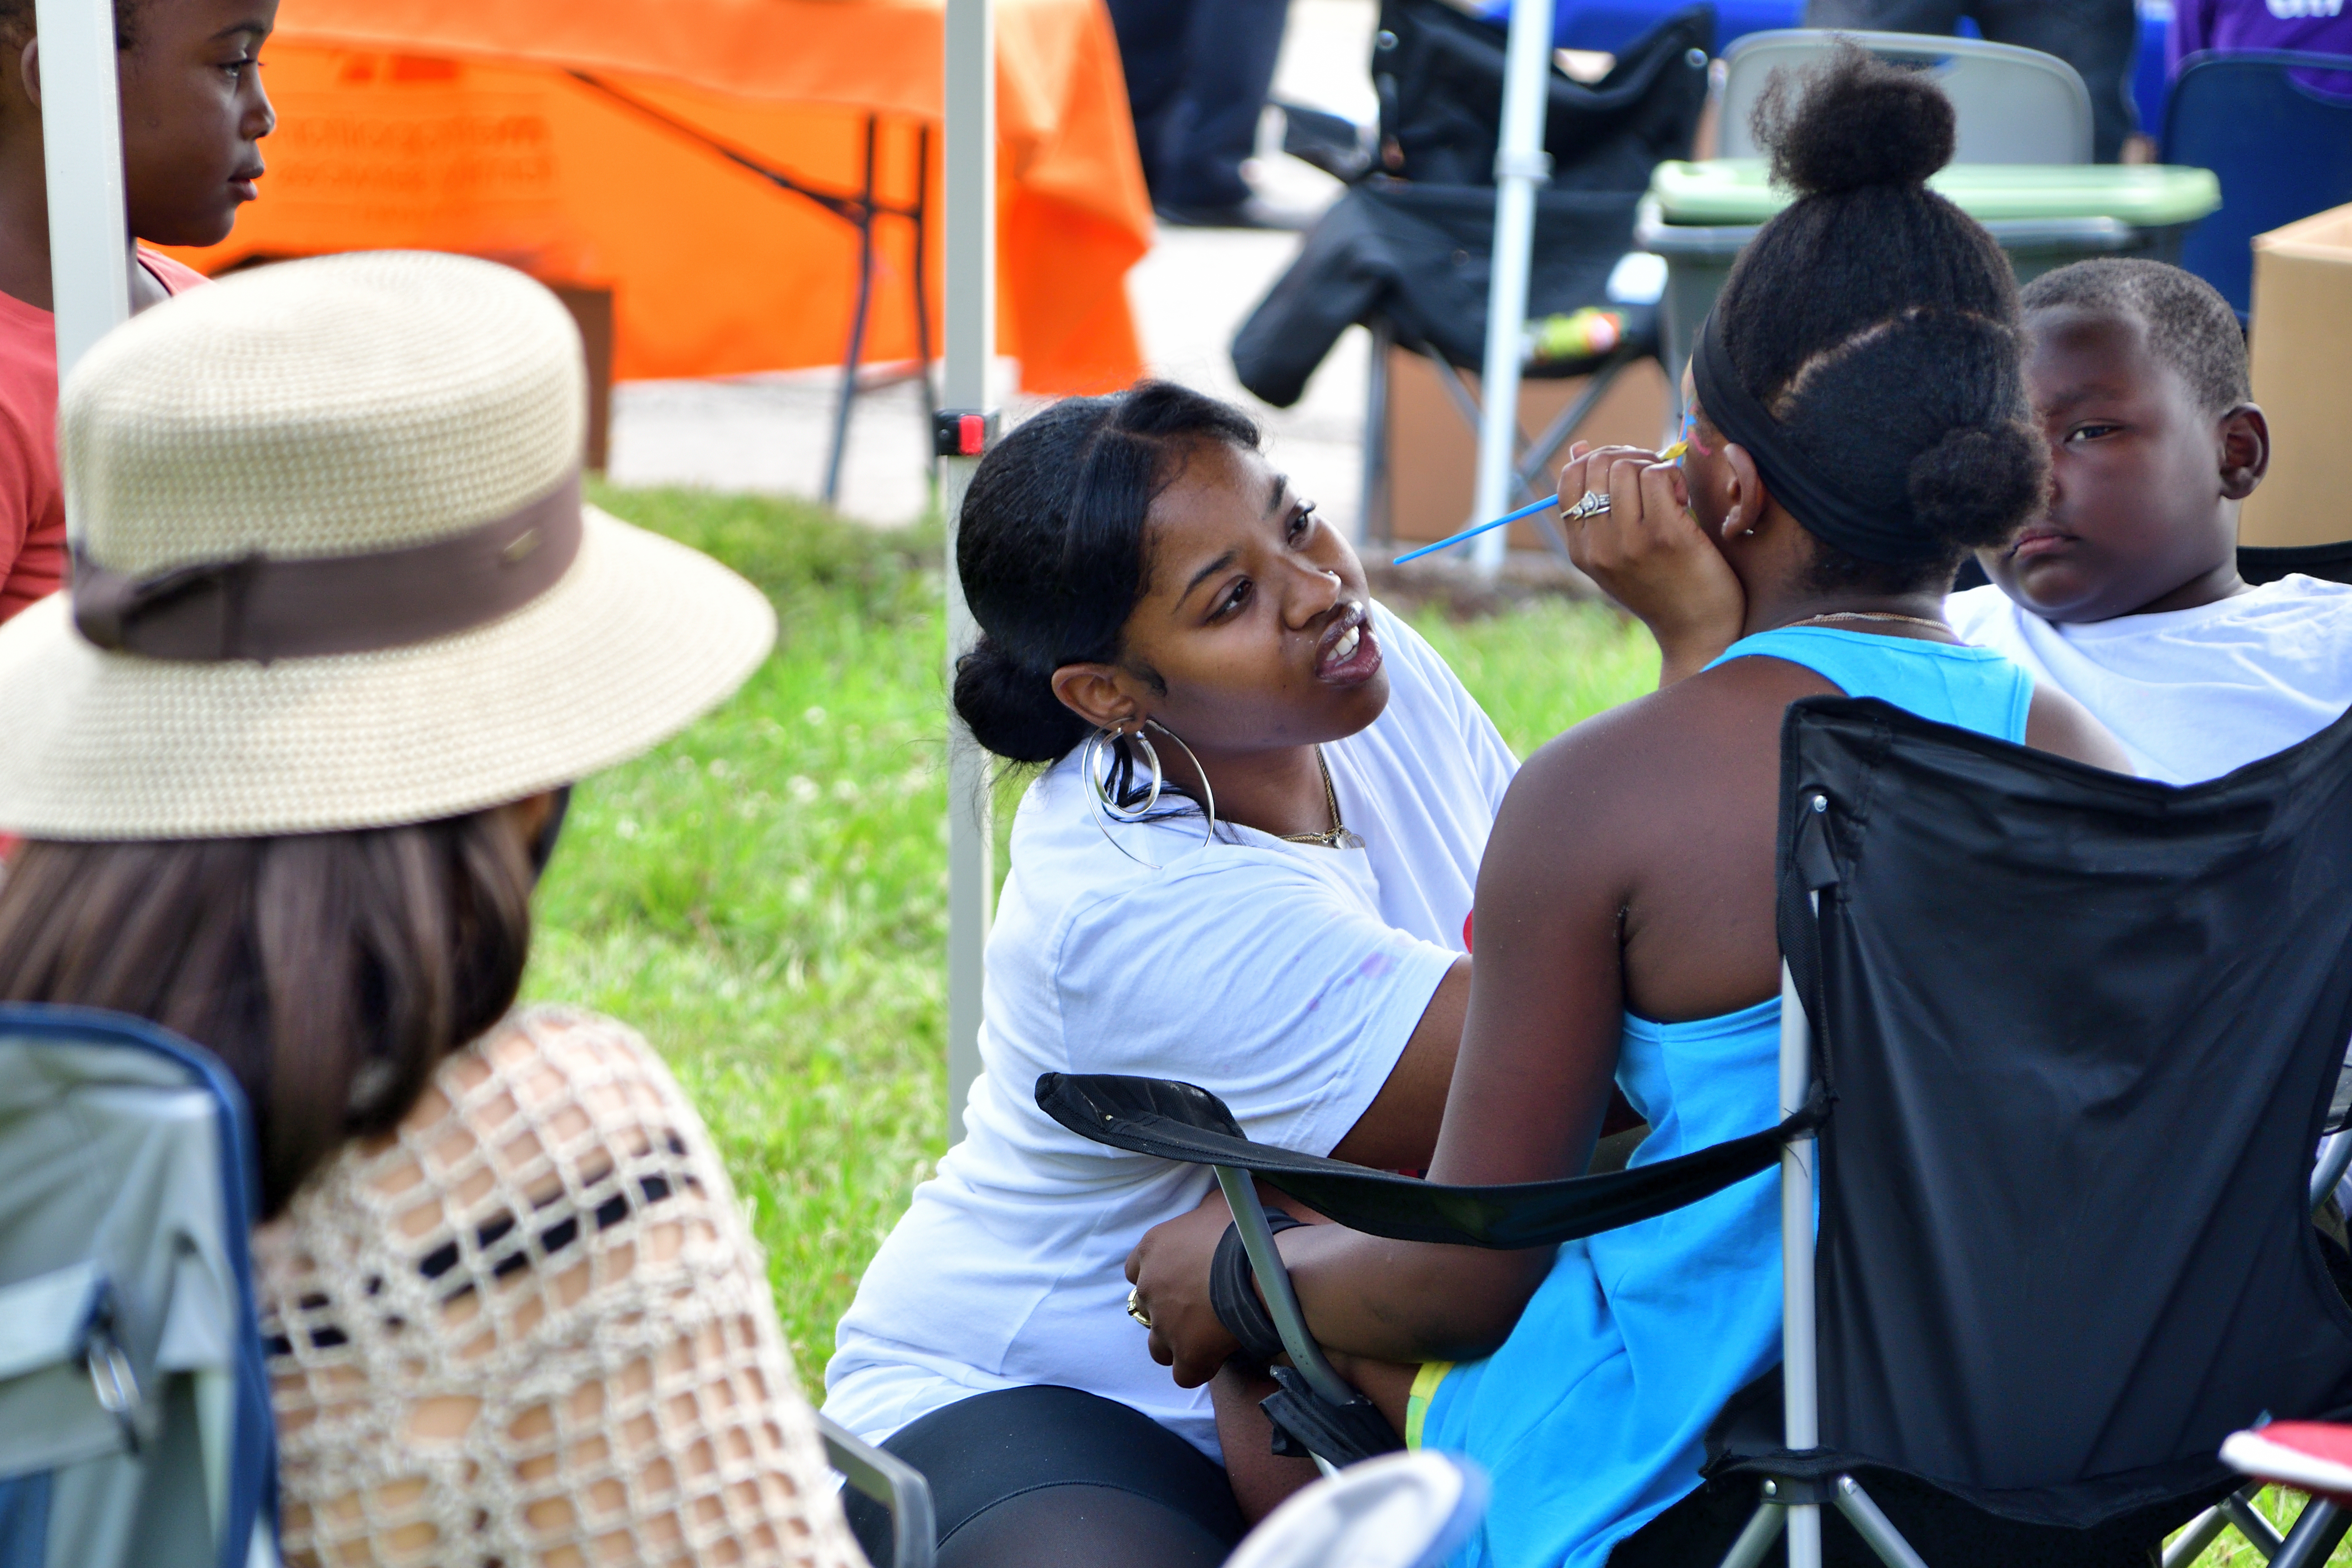 Face Painting, Community Festival 2021, 5th District Chicago Police Headquarters, July 17, 2021 (pic by Emi Yamamoto)